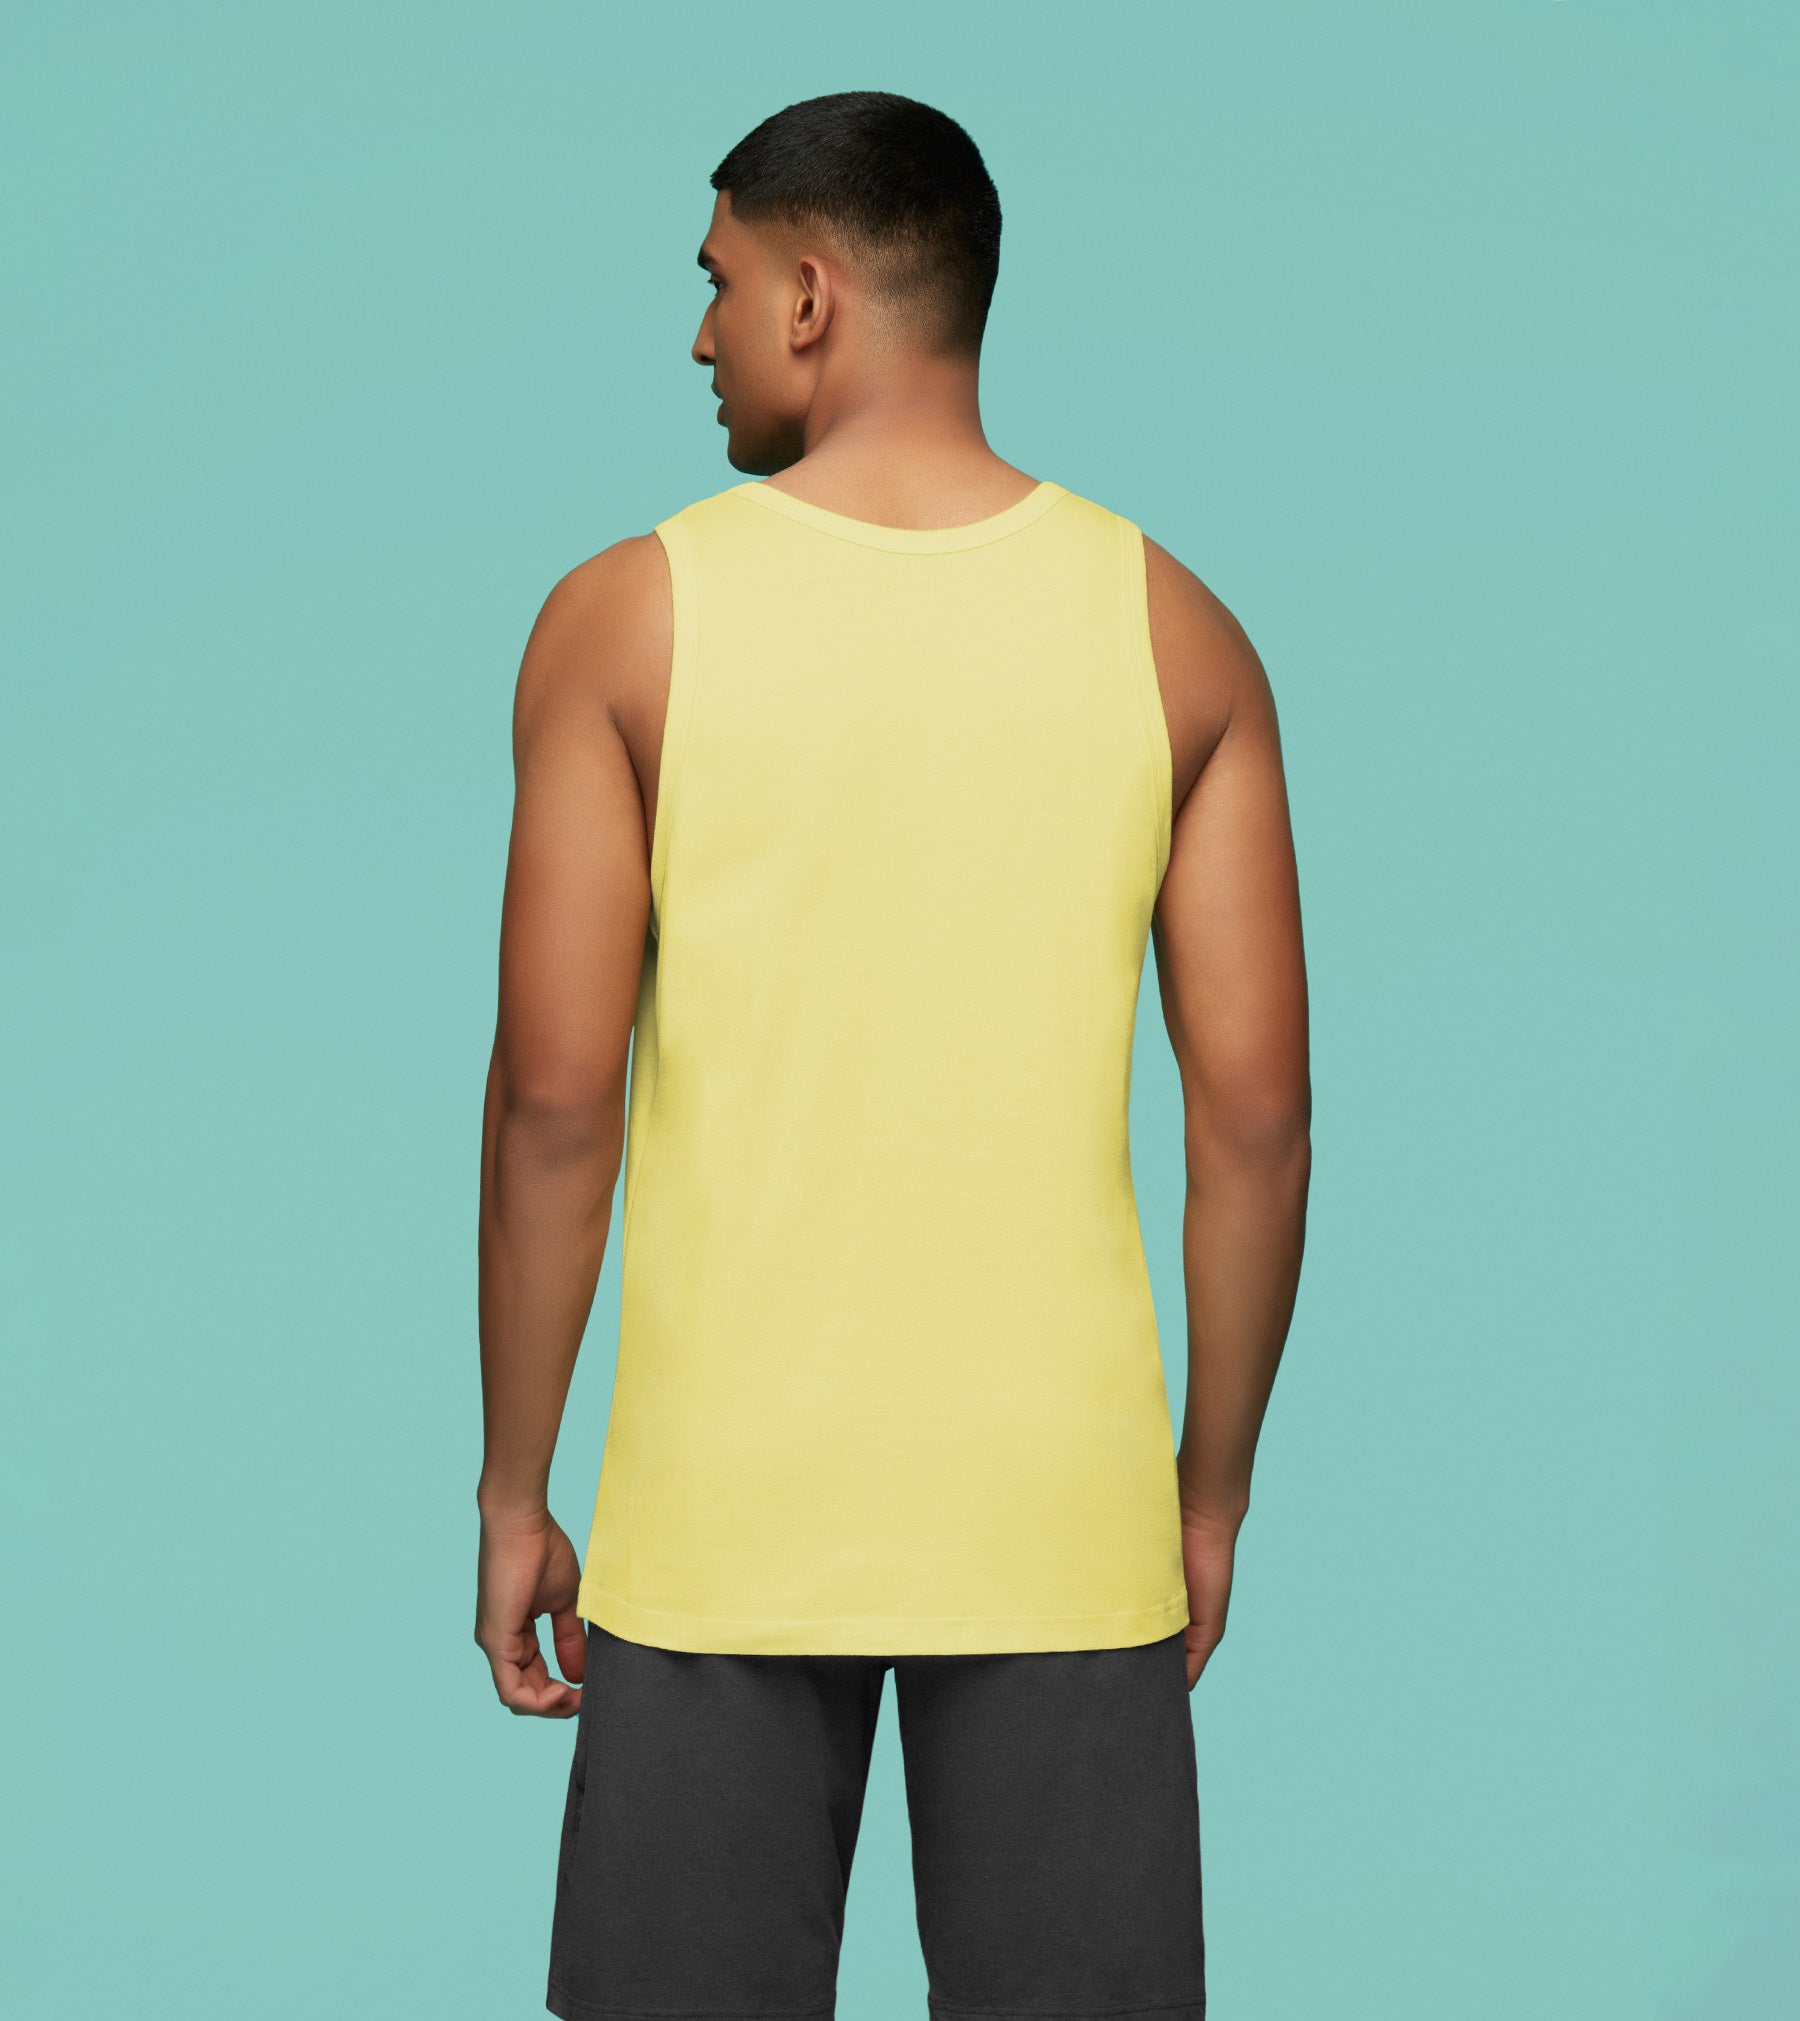 Renew Combed Cotton Fashion Vests For Mens Pack of 2 (Yellow, Light Blue) - XYXX Mens Apparels